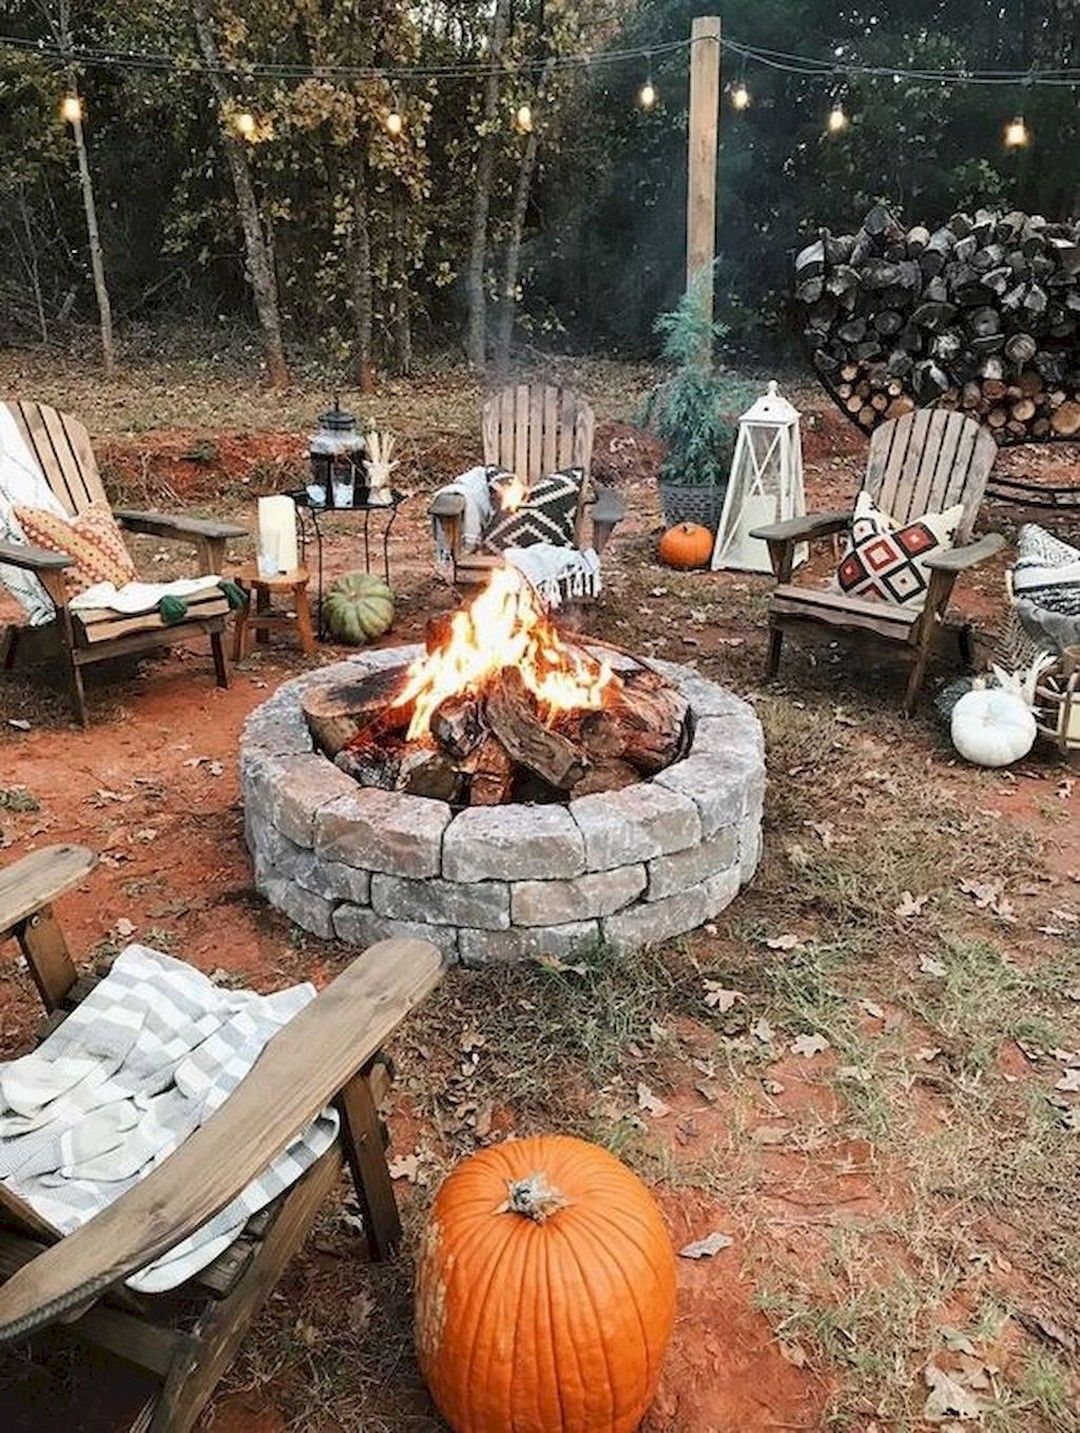 Want a Great Accent To Your Backyard, But Tight On Space? Try This DIY Fire Place/Pit Build T... - Want a Great Accent To Your Backyard, But Tight On Space? Try This DIY Fire Place/Pit Build T... -   14 diy Outdoor fire pit ideas